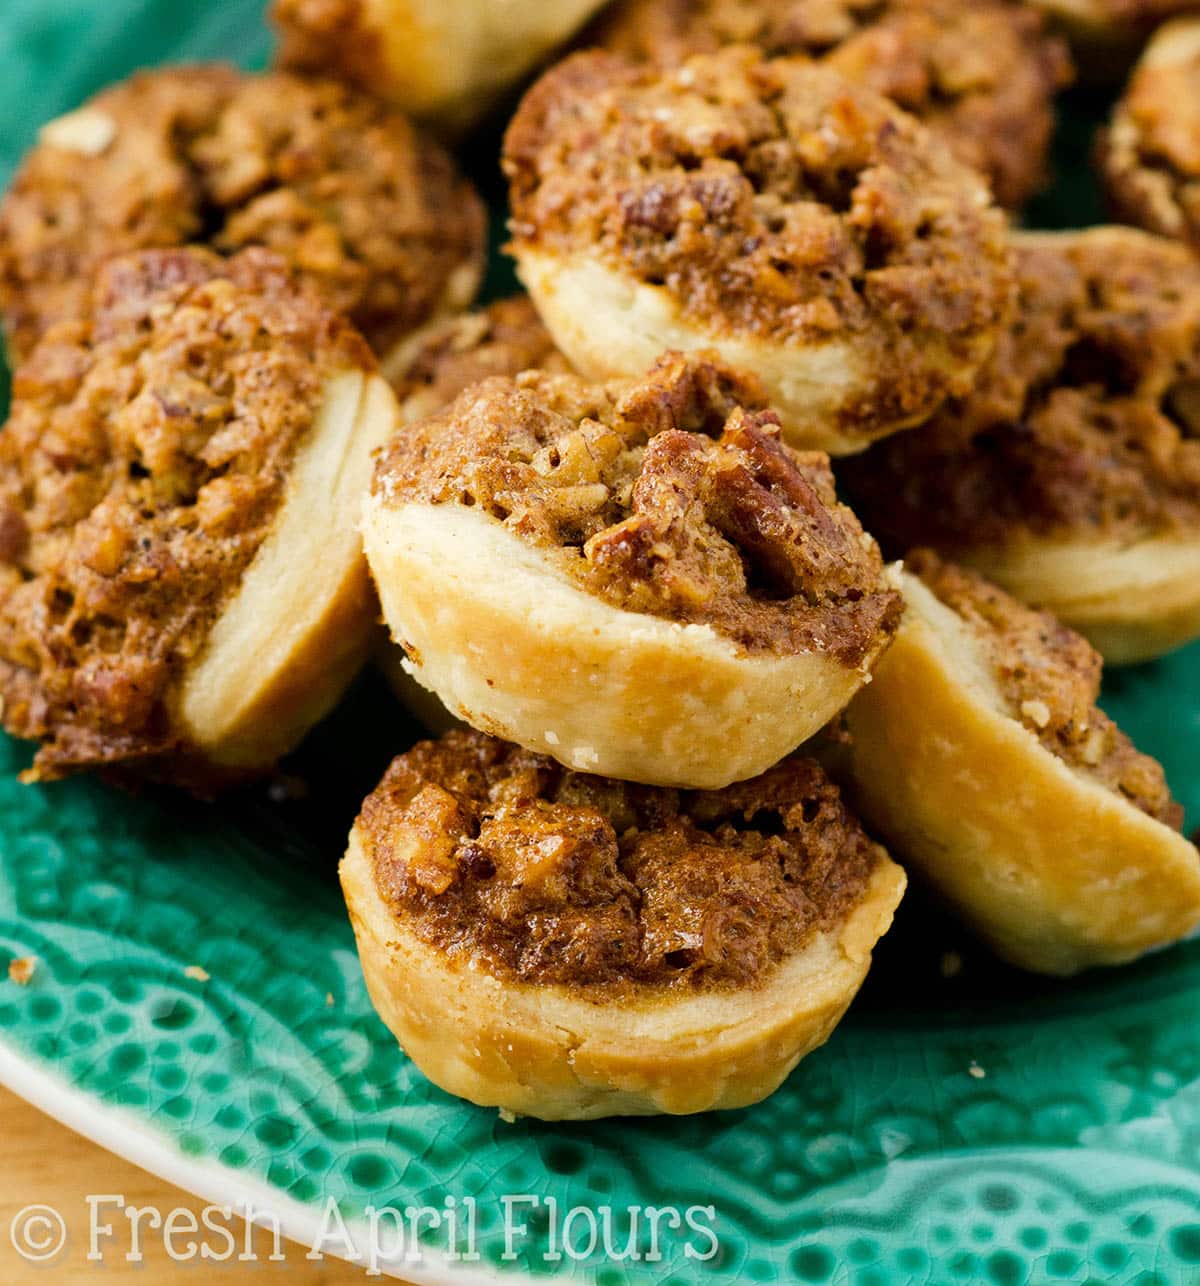 Pecan pie tarts on a turquoise plate.